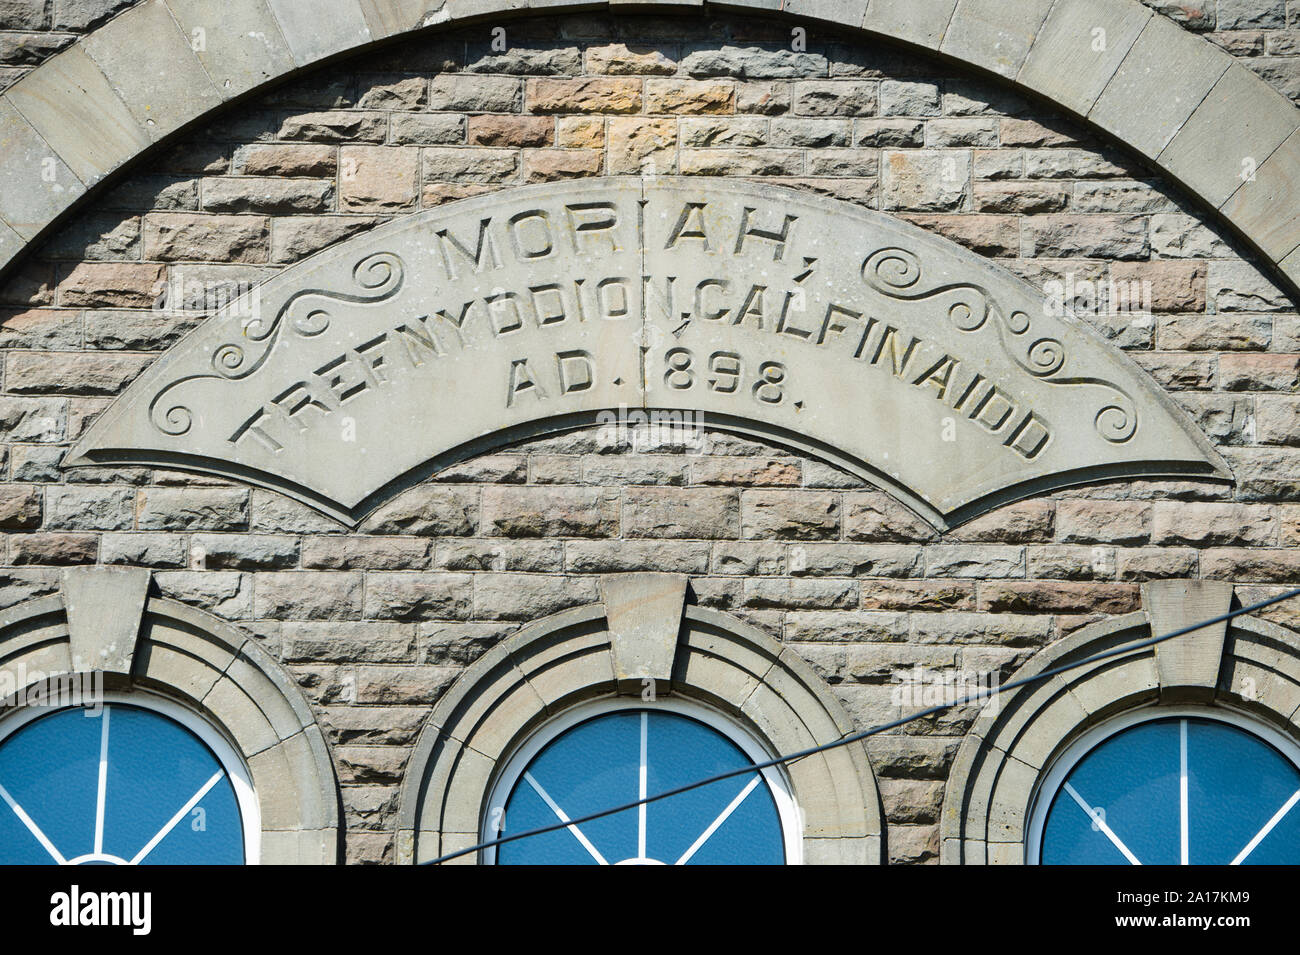 Religion in the UK: Moriah Chapel, Loughor, Swansea. Moriah was the home church of Evan Roberts, who led the Revival in 1904-05 which started in the Calvinistic Methodist Church and spread to other denominations. An estimated 100,000 people in Wales became Christians as a result Stock Photo